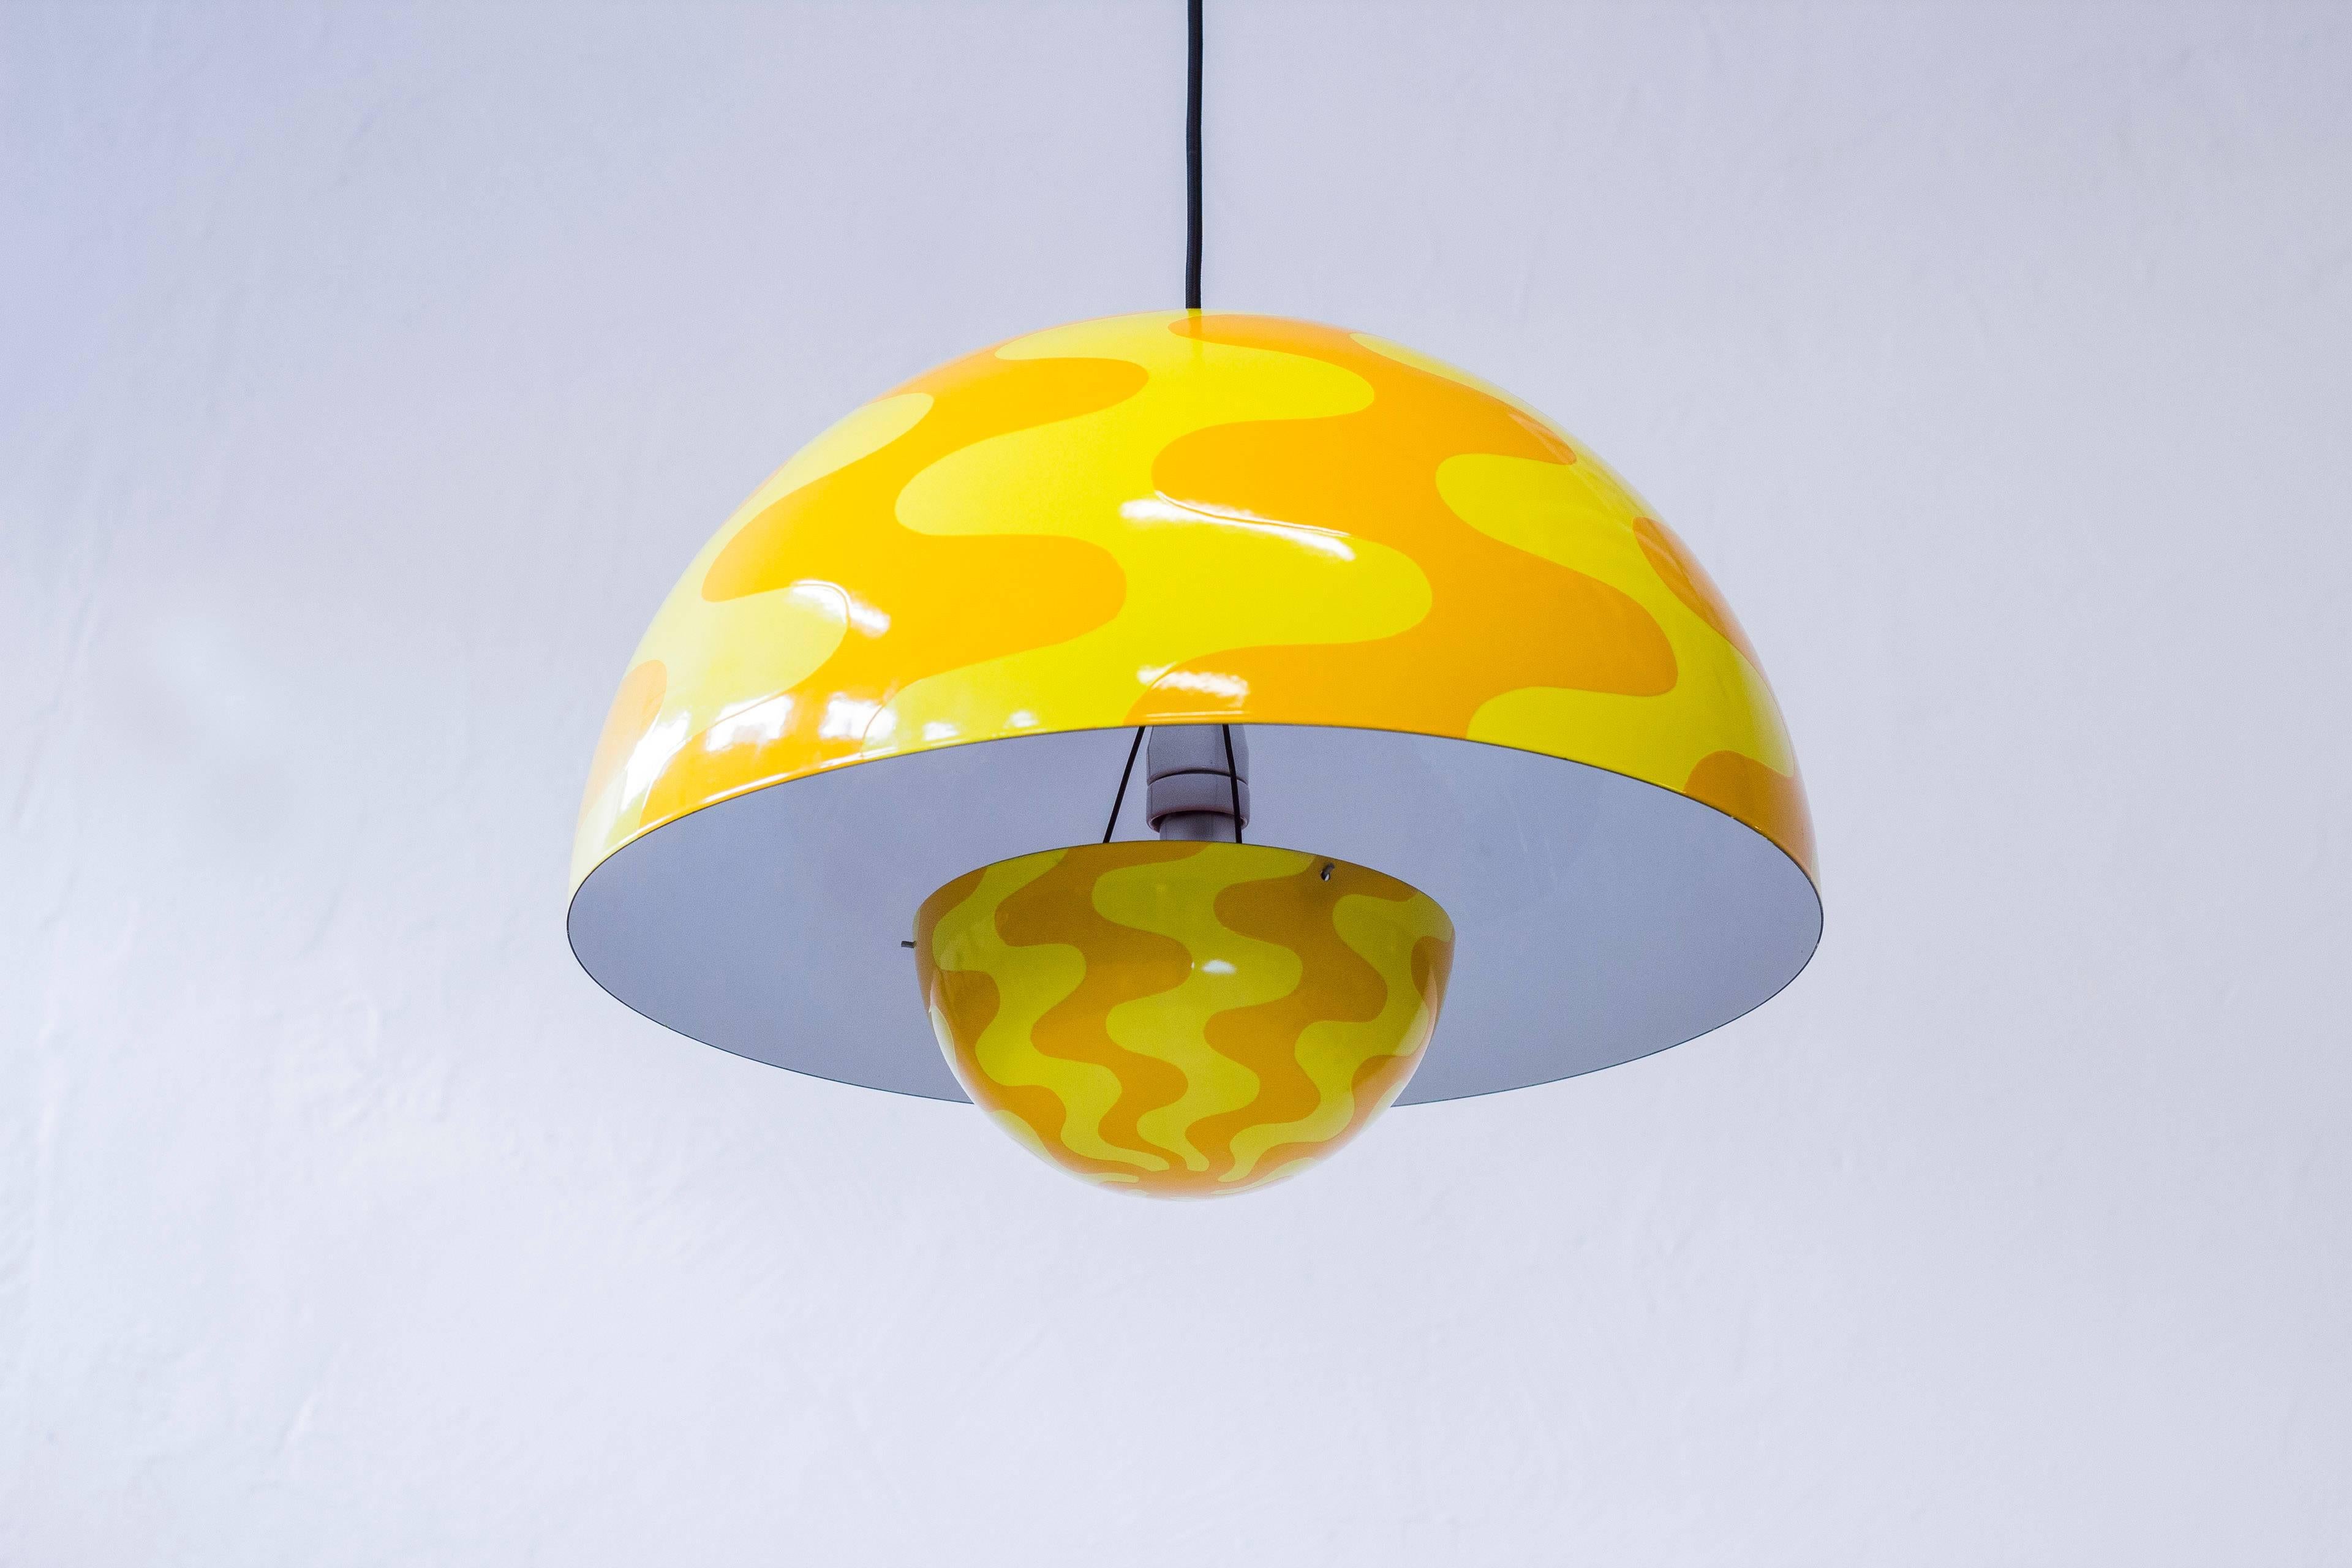 Rare large flower pot ceiling lamp designed by Verner Panton. Produced by Louis Poulsen in the early 1970s. Made from enameled steel with two tones of yellow on the outside and white and red enamel on the inside. All original with only exchanged